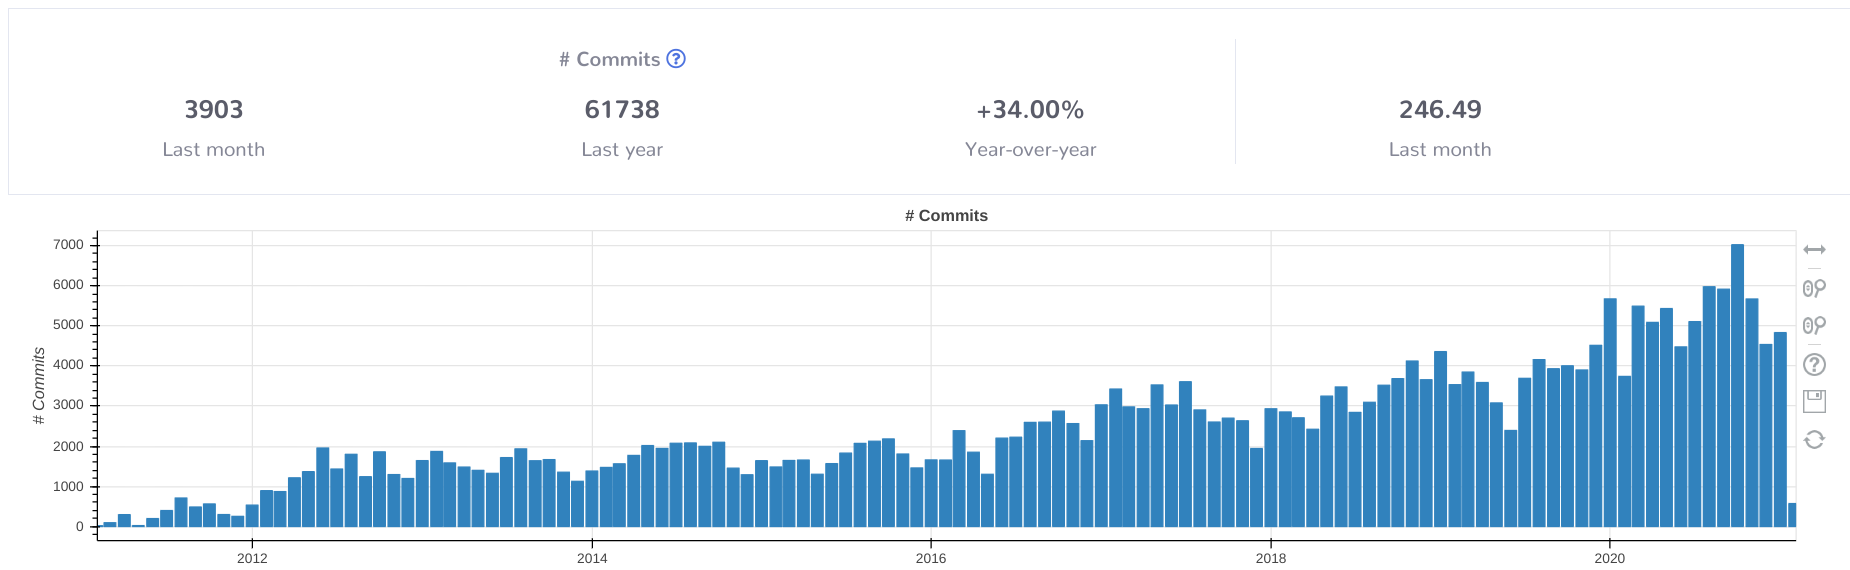 development growth from cauldron.io-project-3638.png